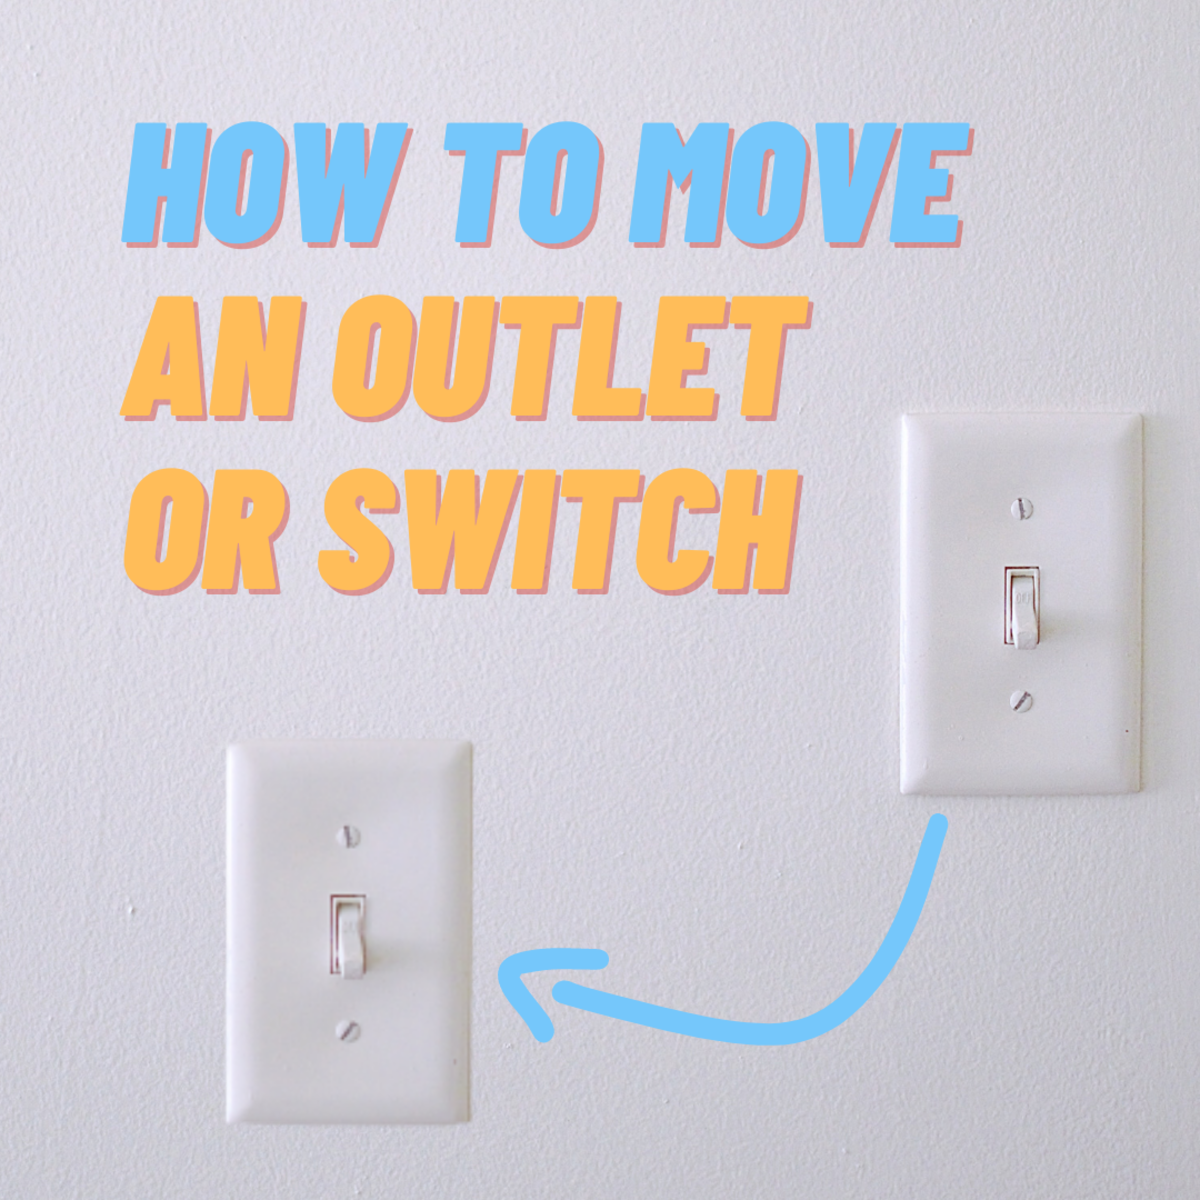 Light Switch UHD. Without switch